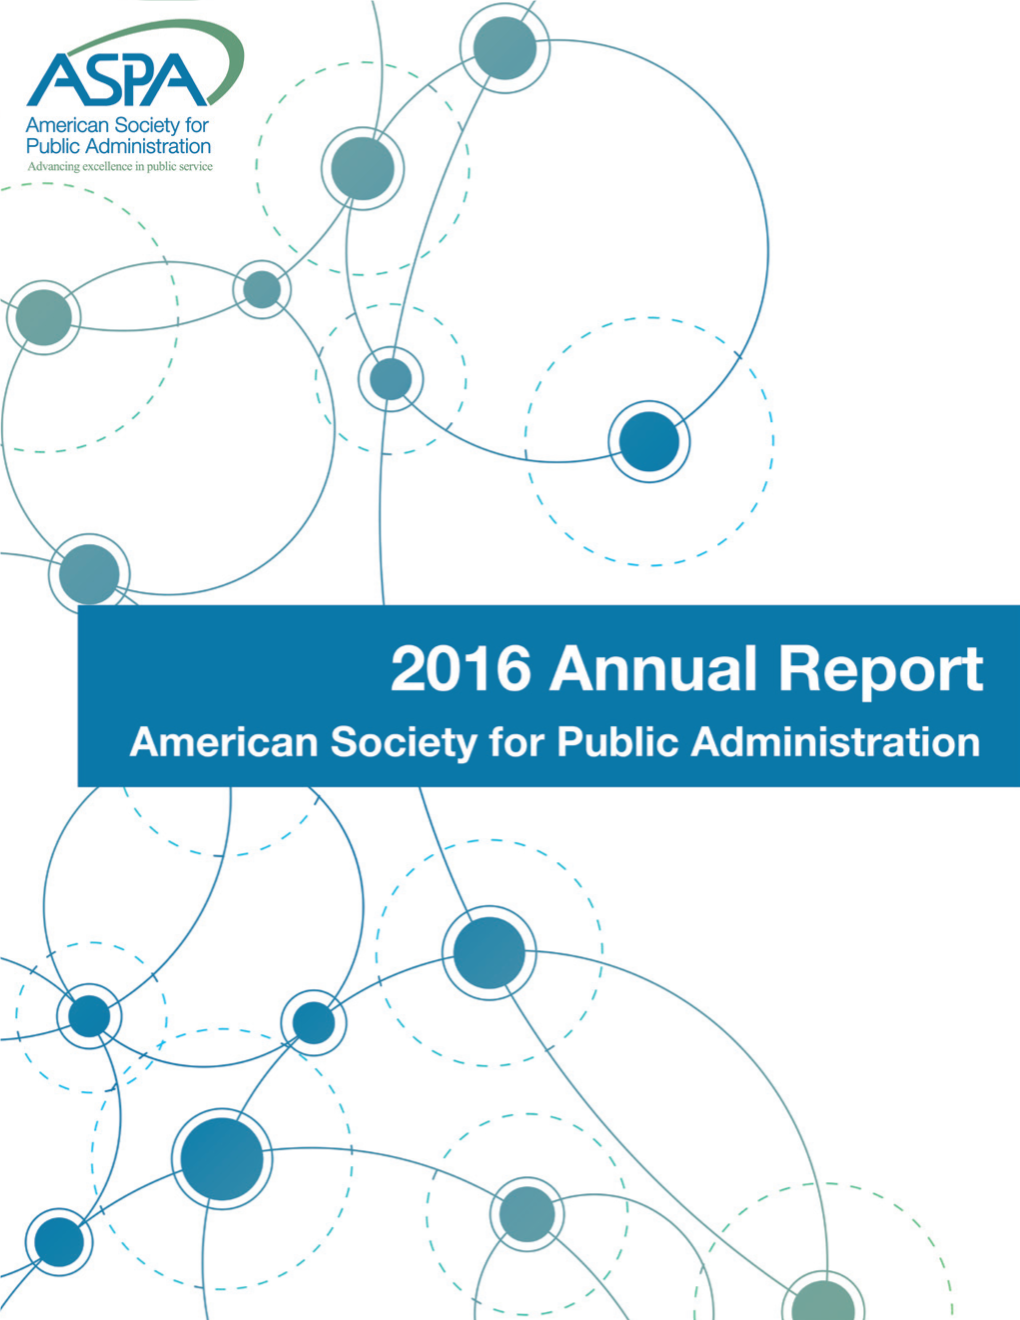 Released Its 2016 Annual Report